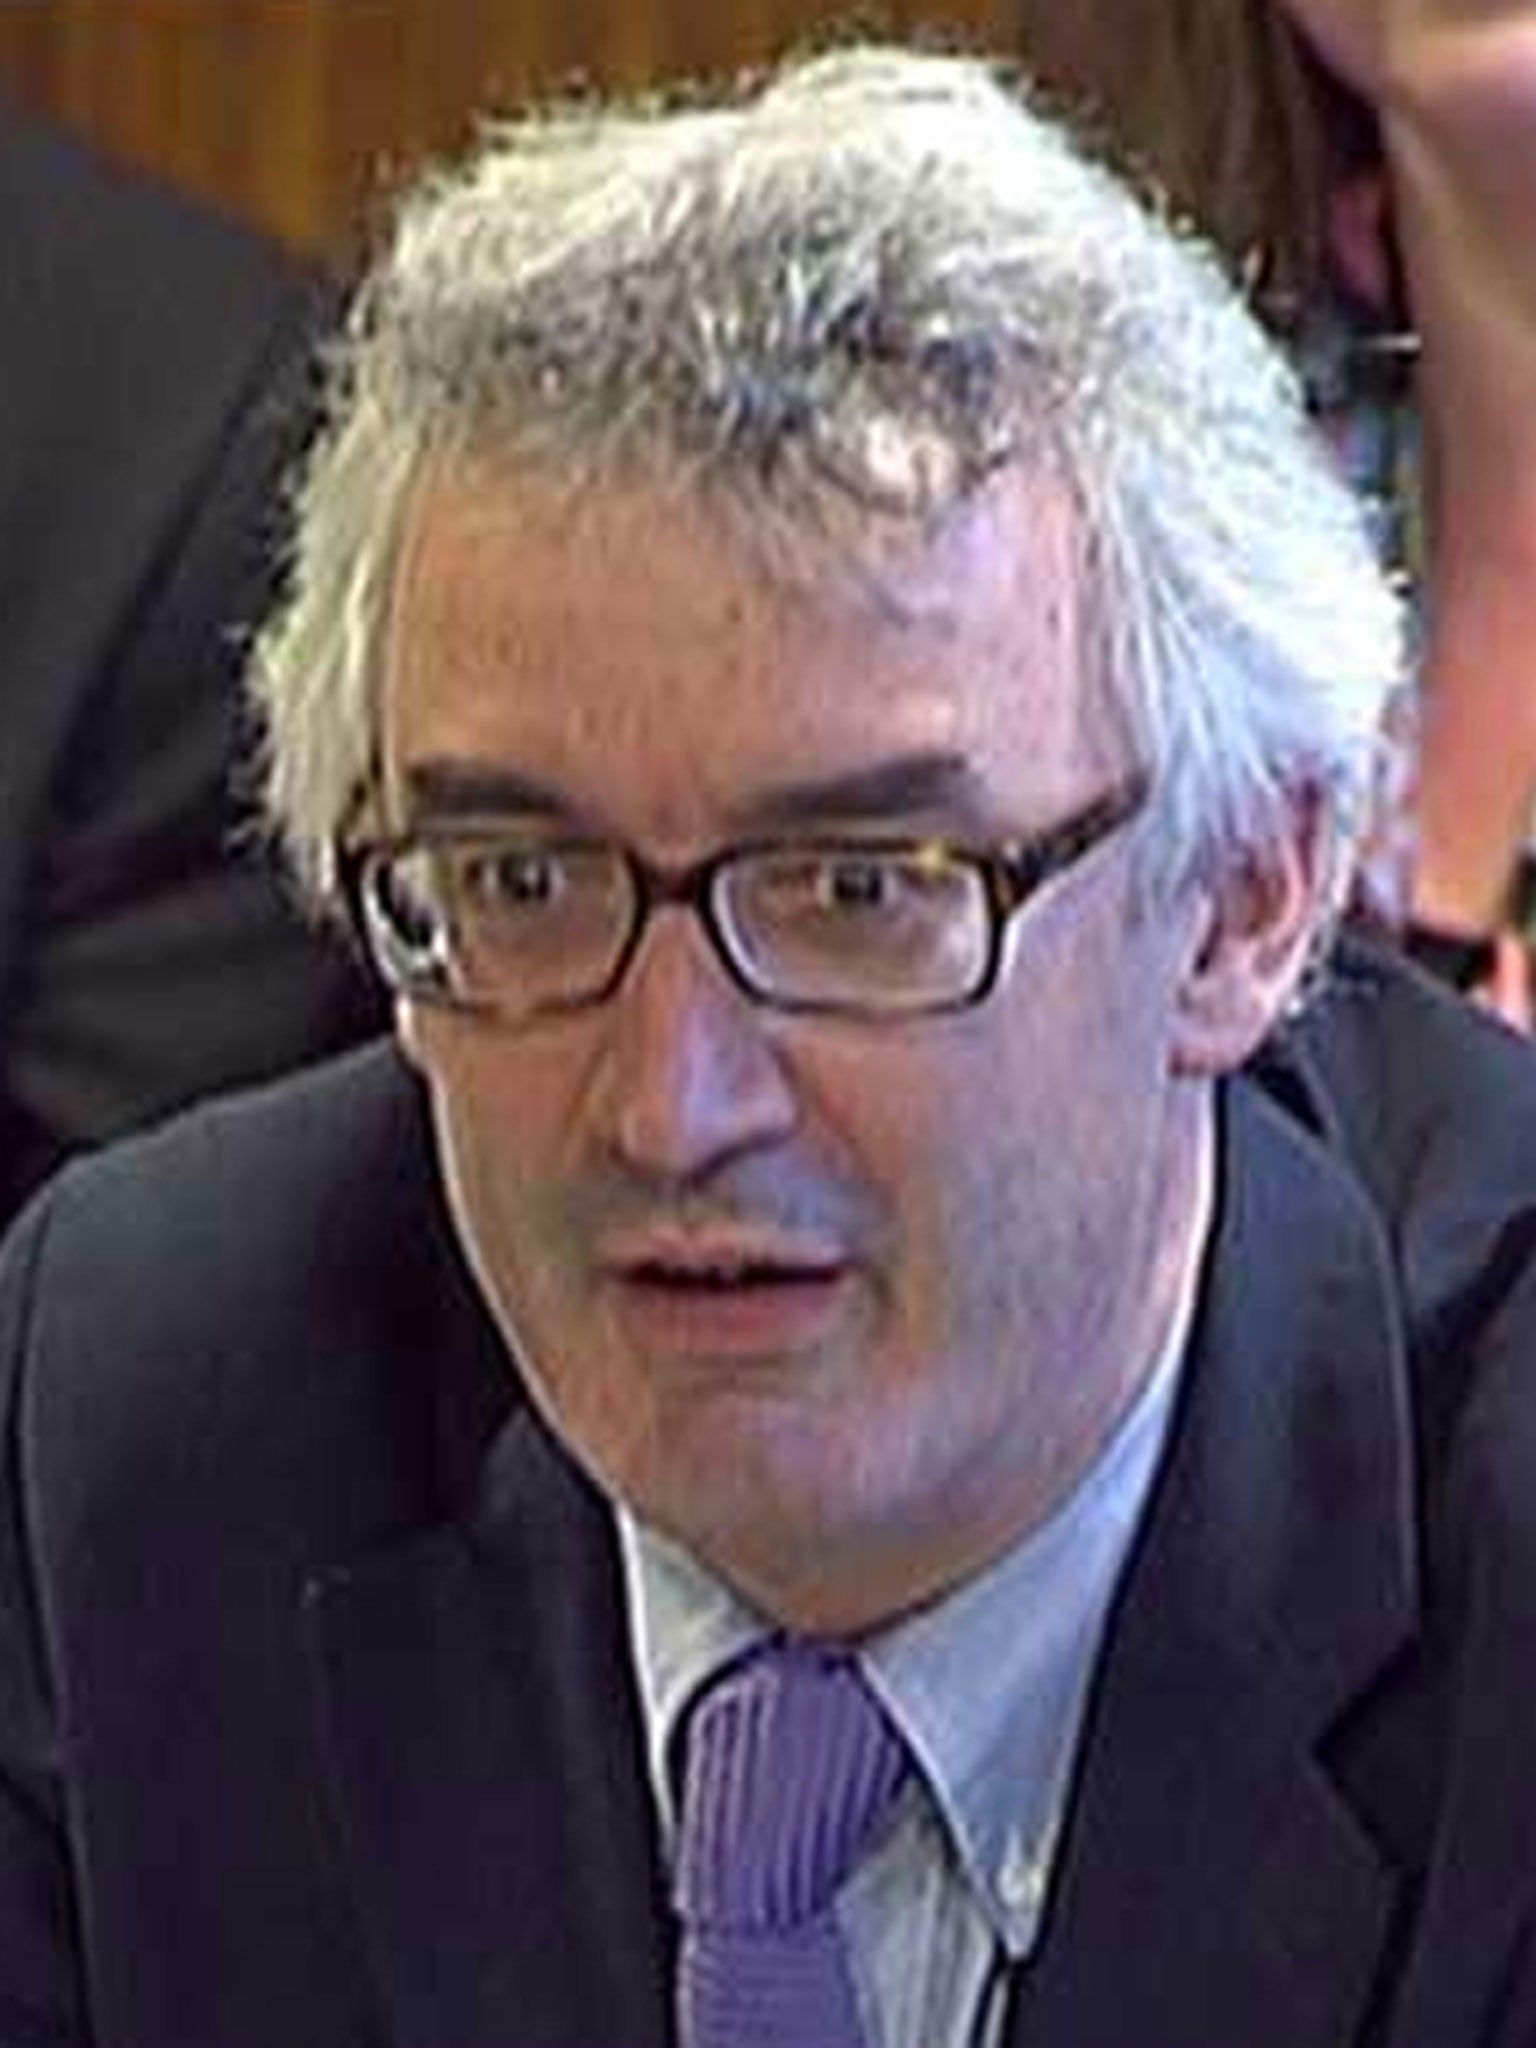 Sir Nicholas Macpherson said the Treasury risked losing staff if a pay freeze went ahead